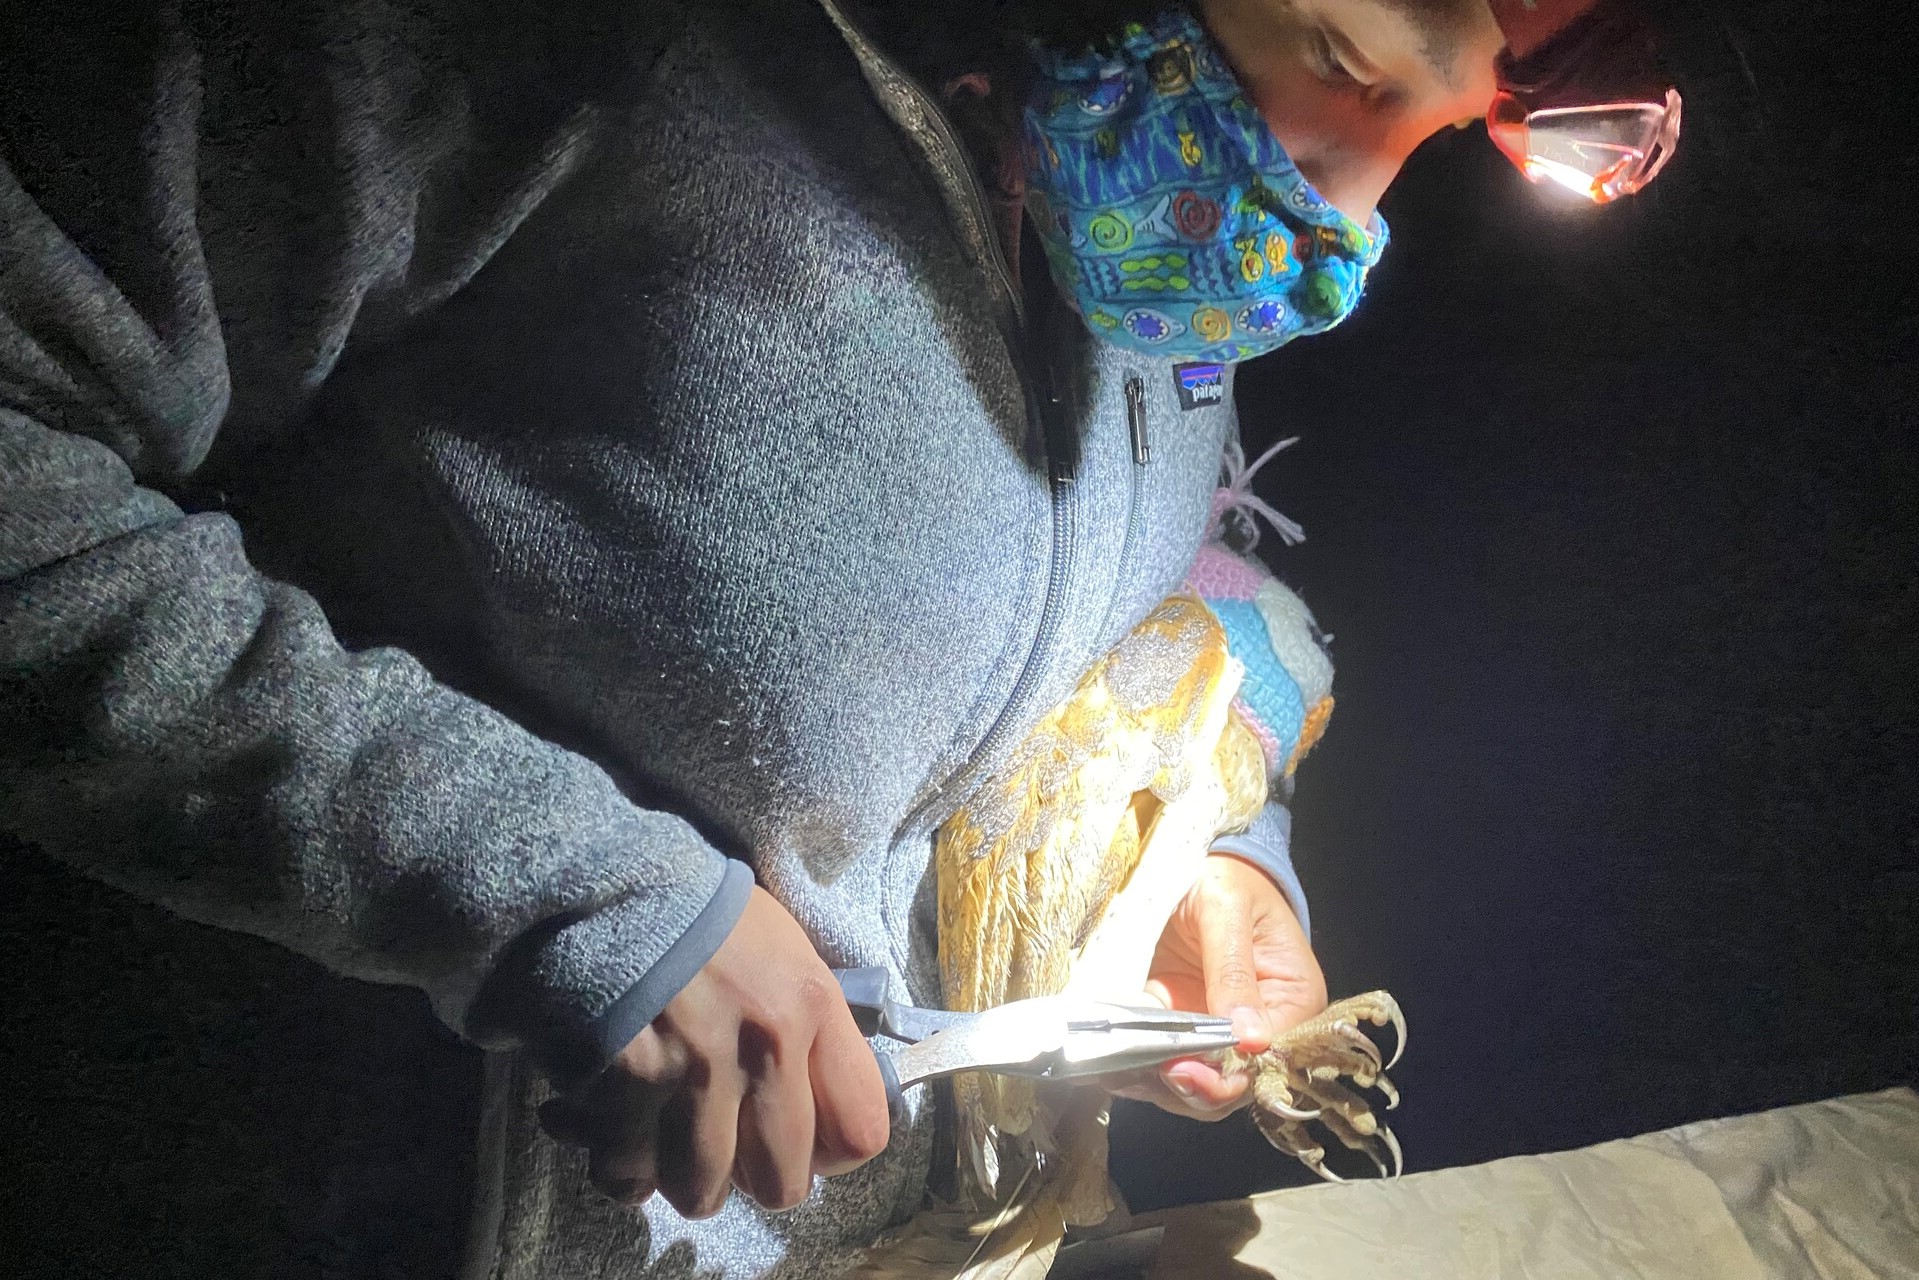 A person ties an ID band around the leg of a barn owl at night.